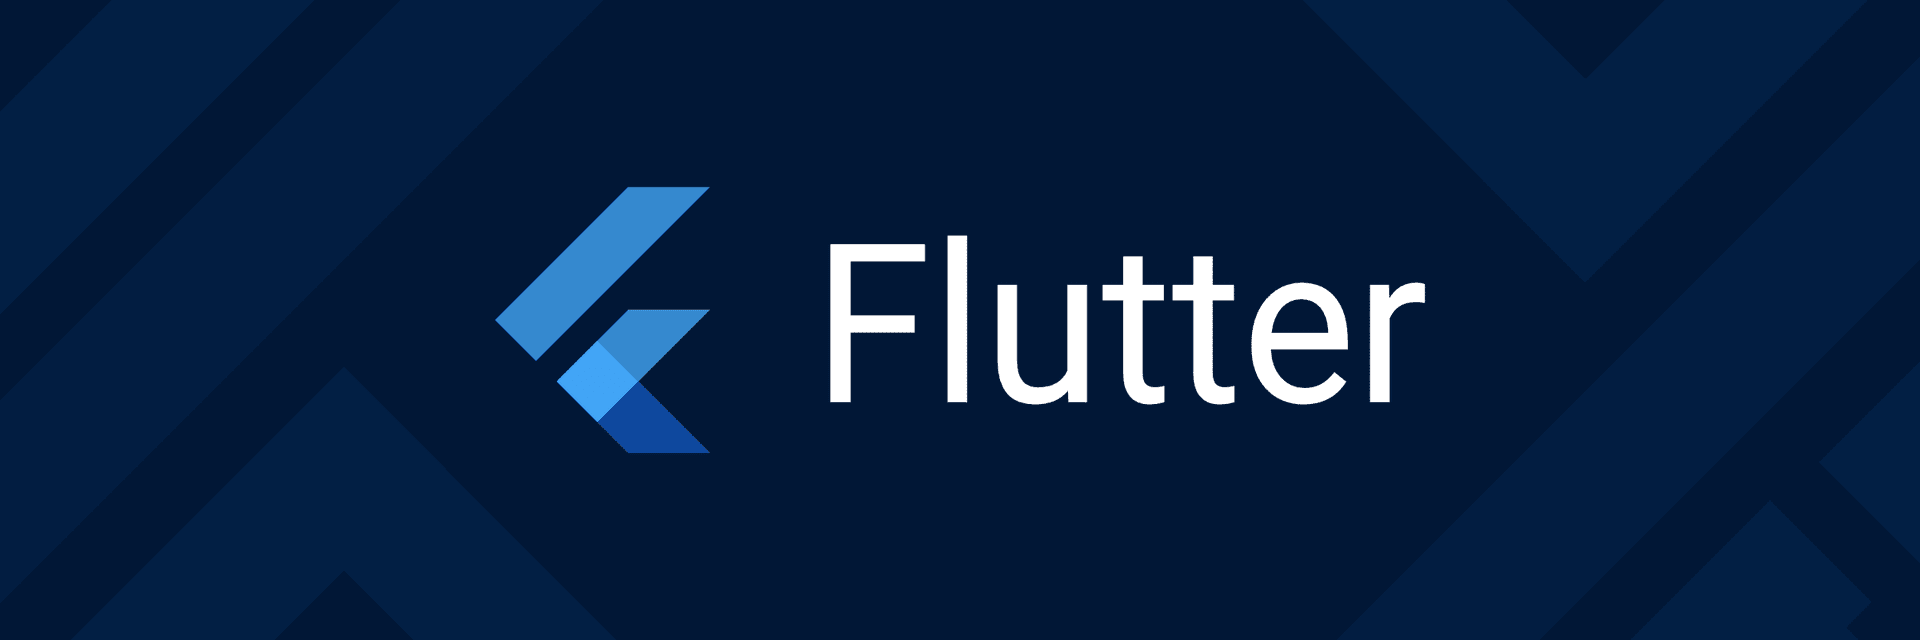 Introducing new action: Flutter